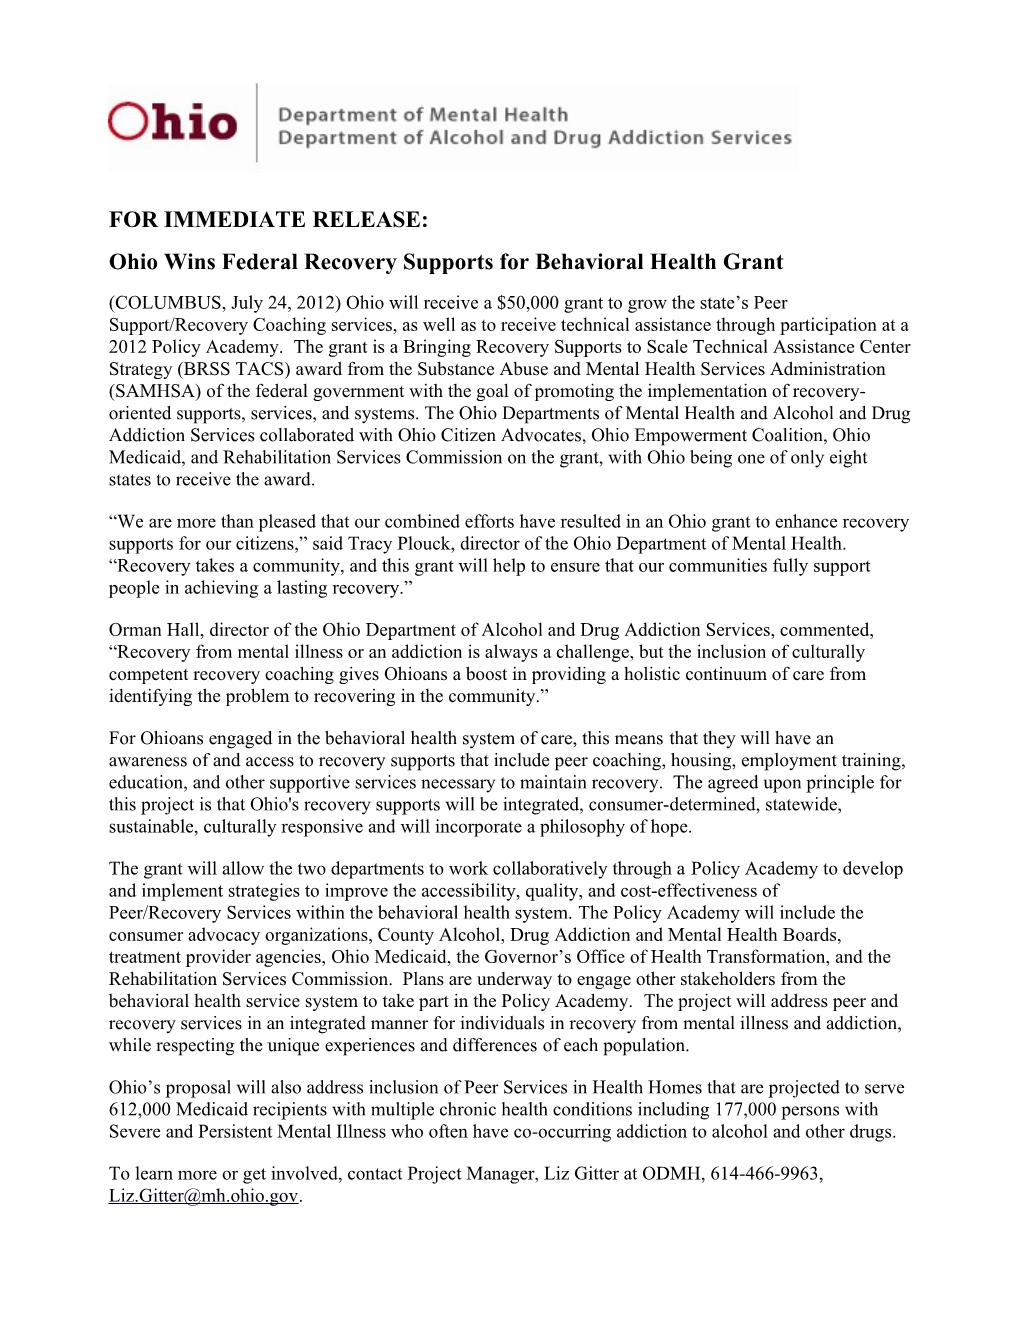 Ohio Wins Federal Recovery Supports for Behavioral Health Grant